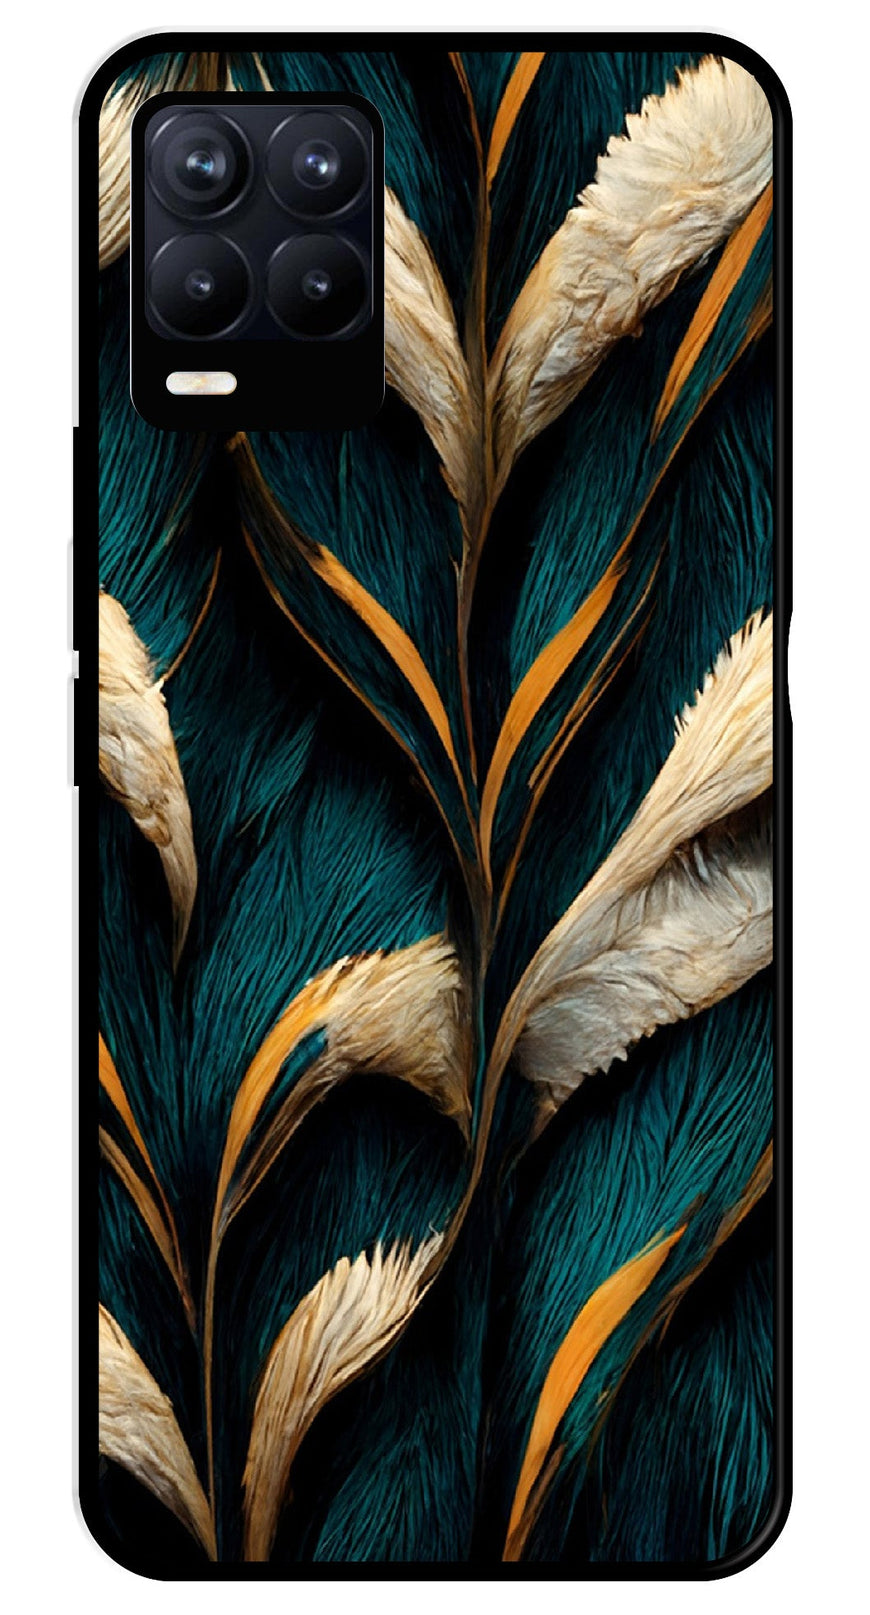 Feathers Metal Mobile Case for Realme 8 Pro  (Design No -30)